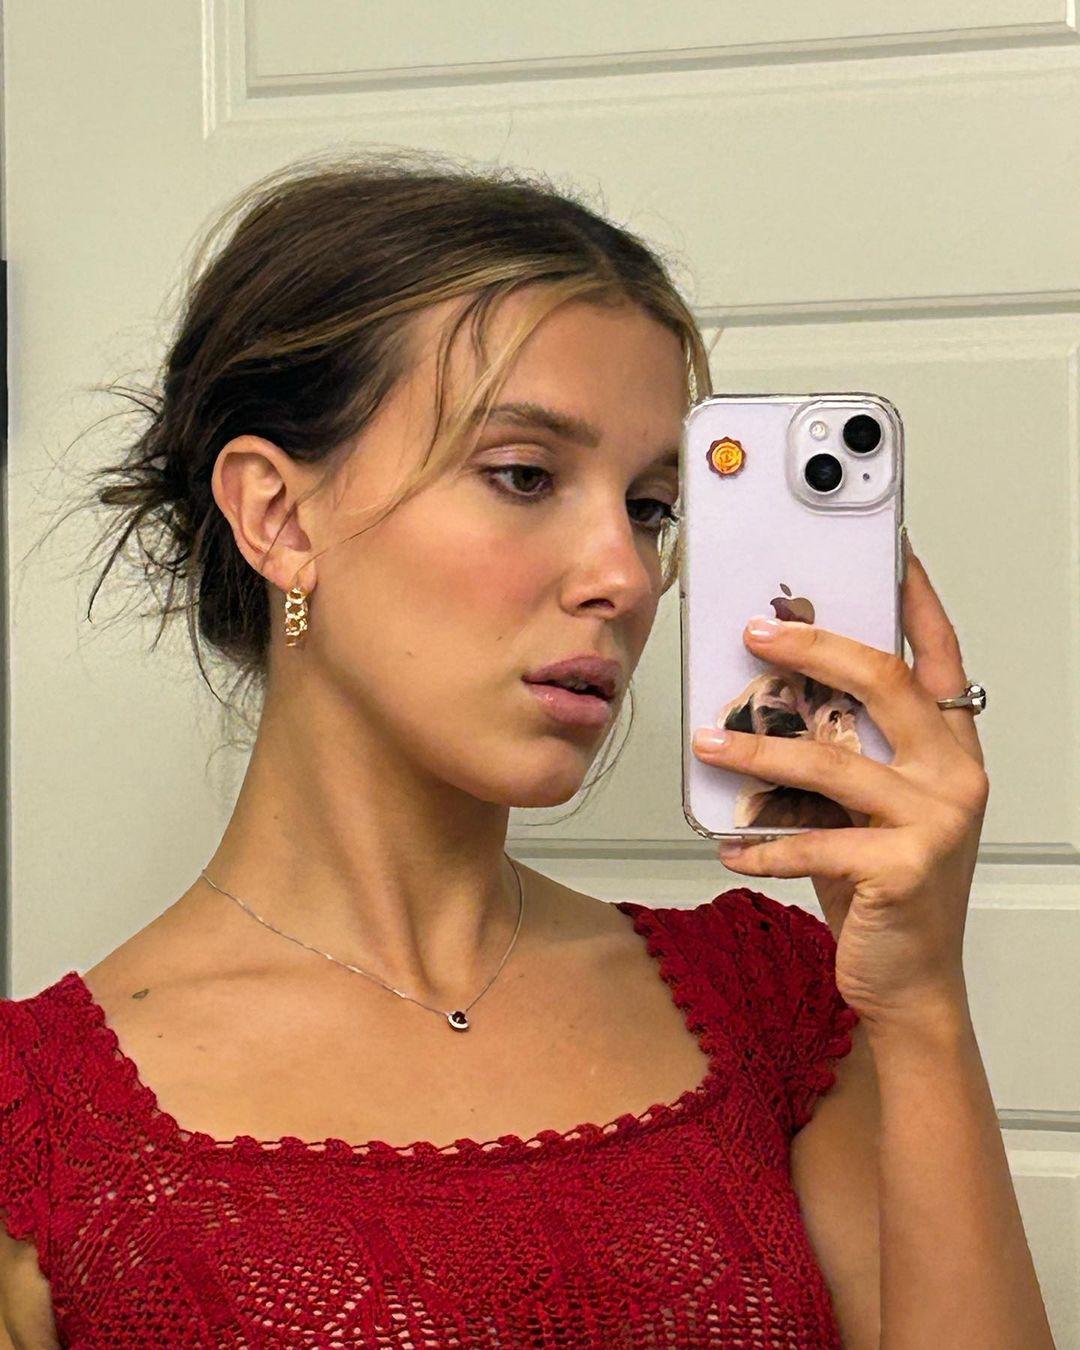 Millie Bobby Brown does not have social media on her phone